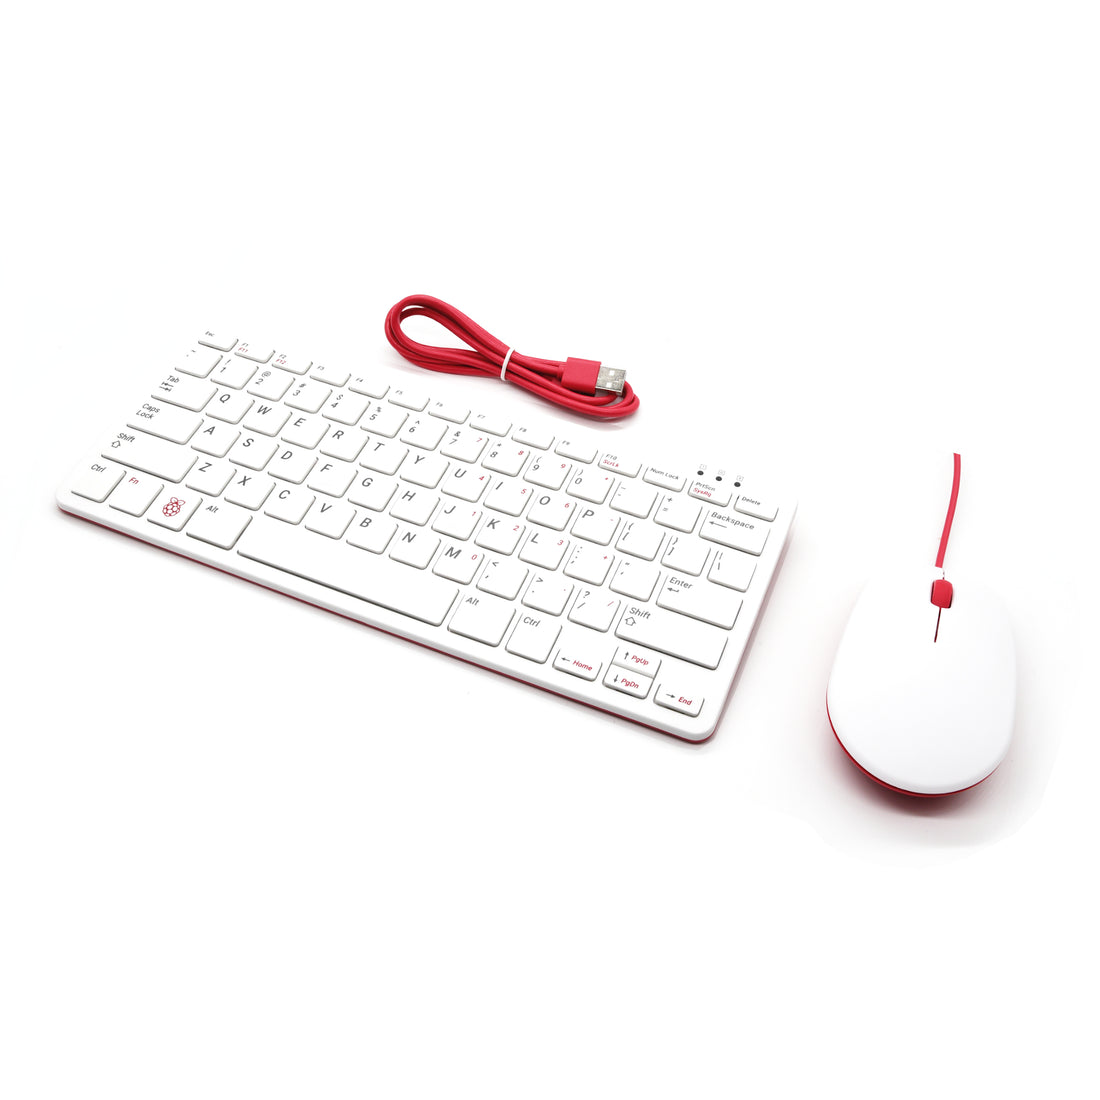 Raspberry Pi Official Keyboard and Mouse Value Pack (U.S. Version Red/White) by PepperTech Digital